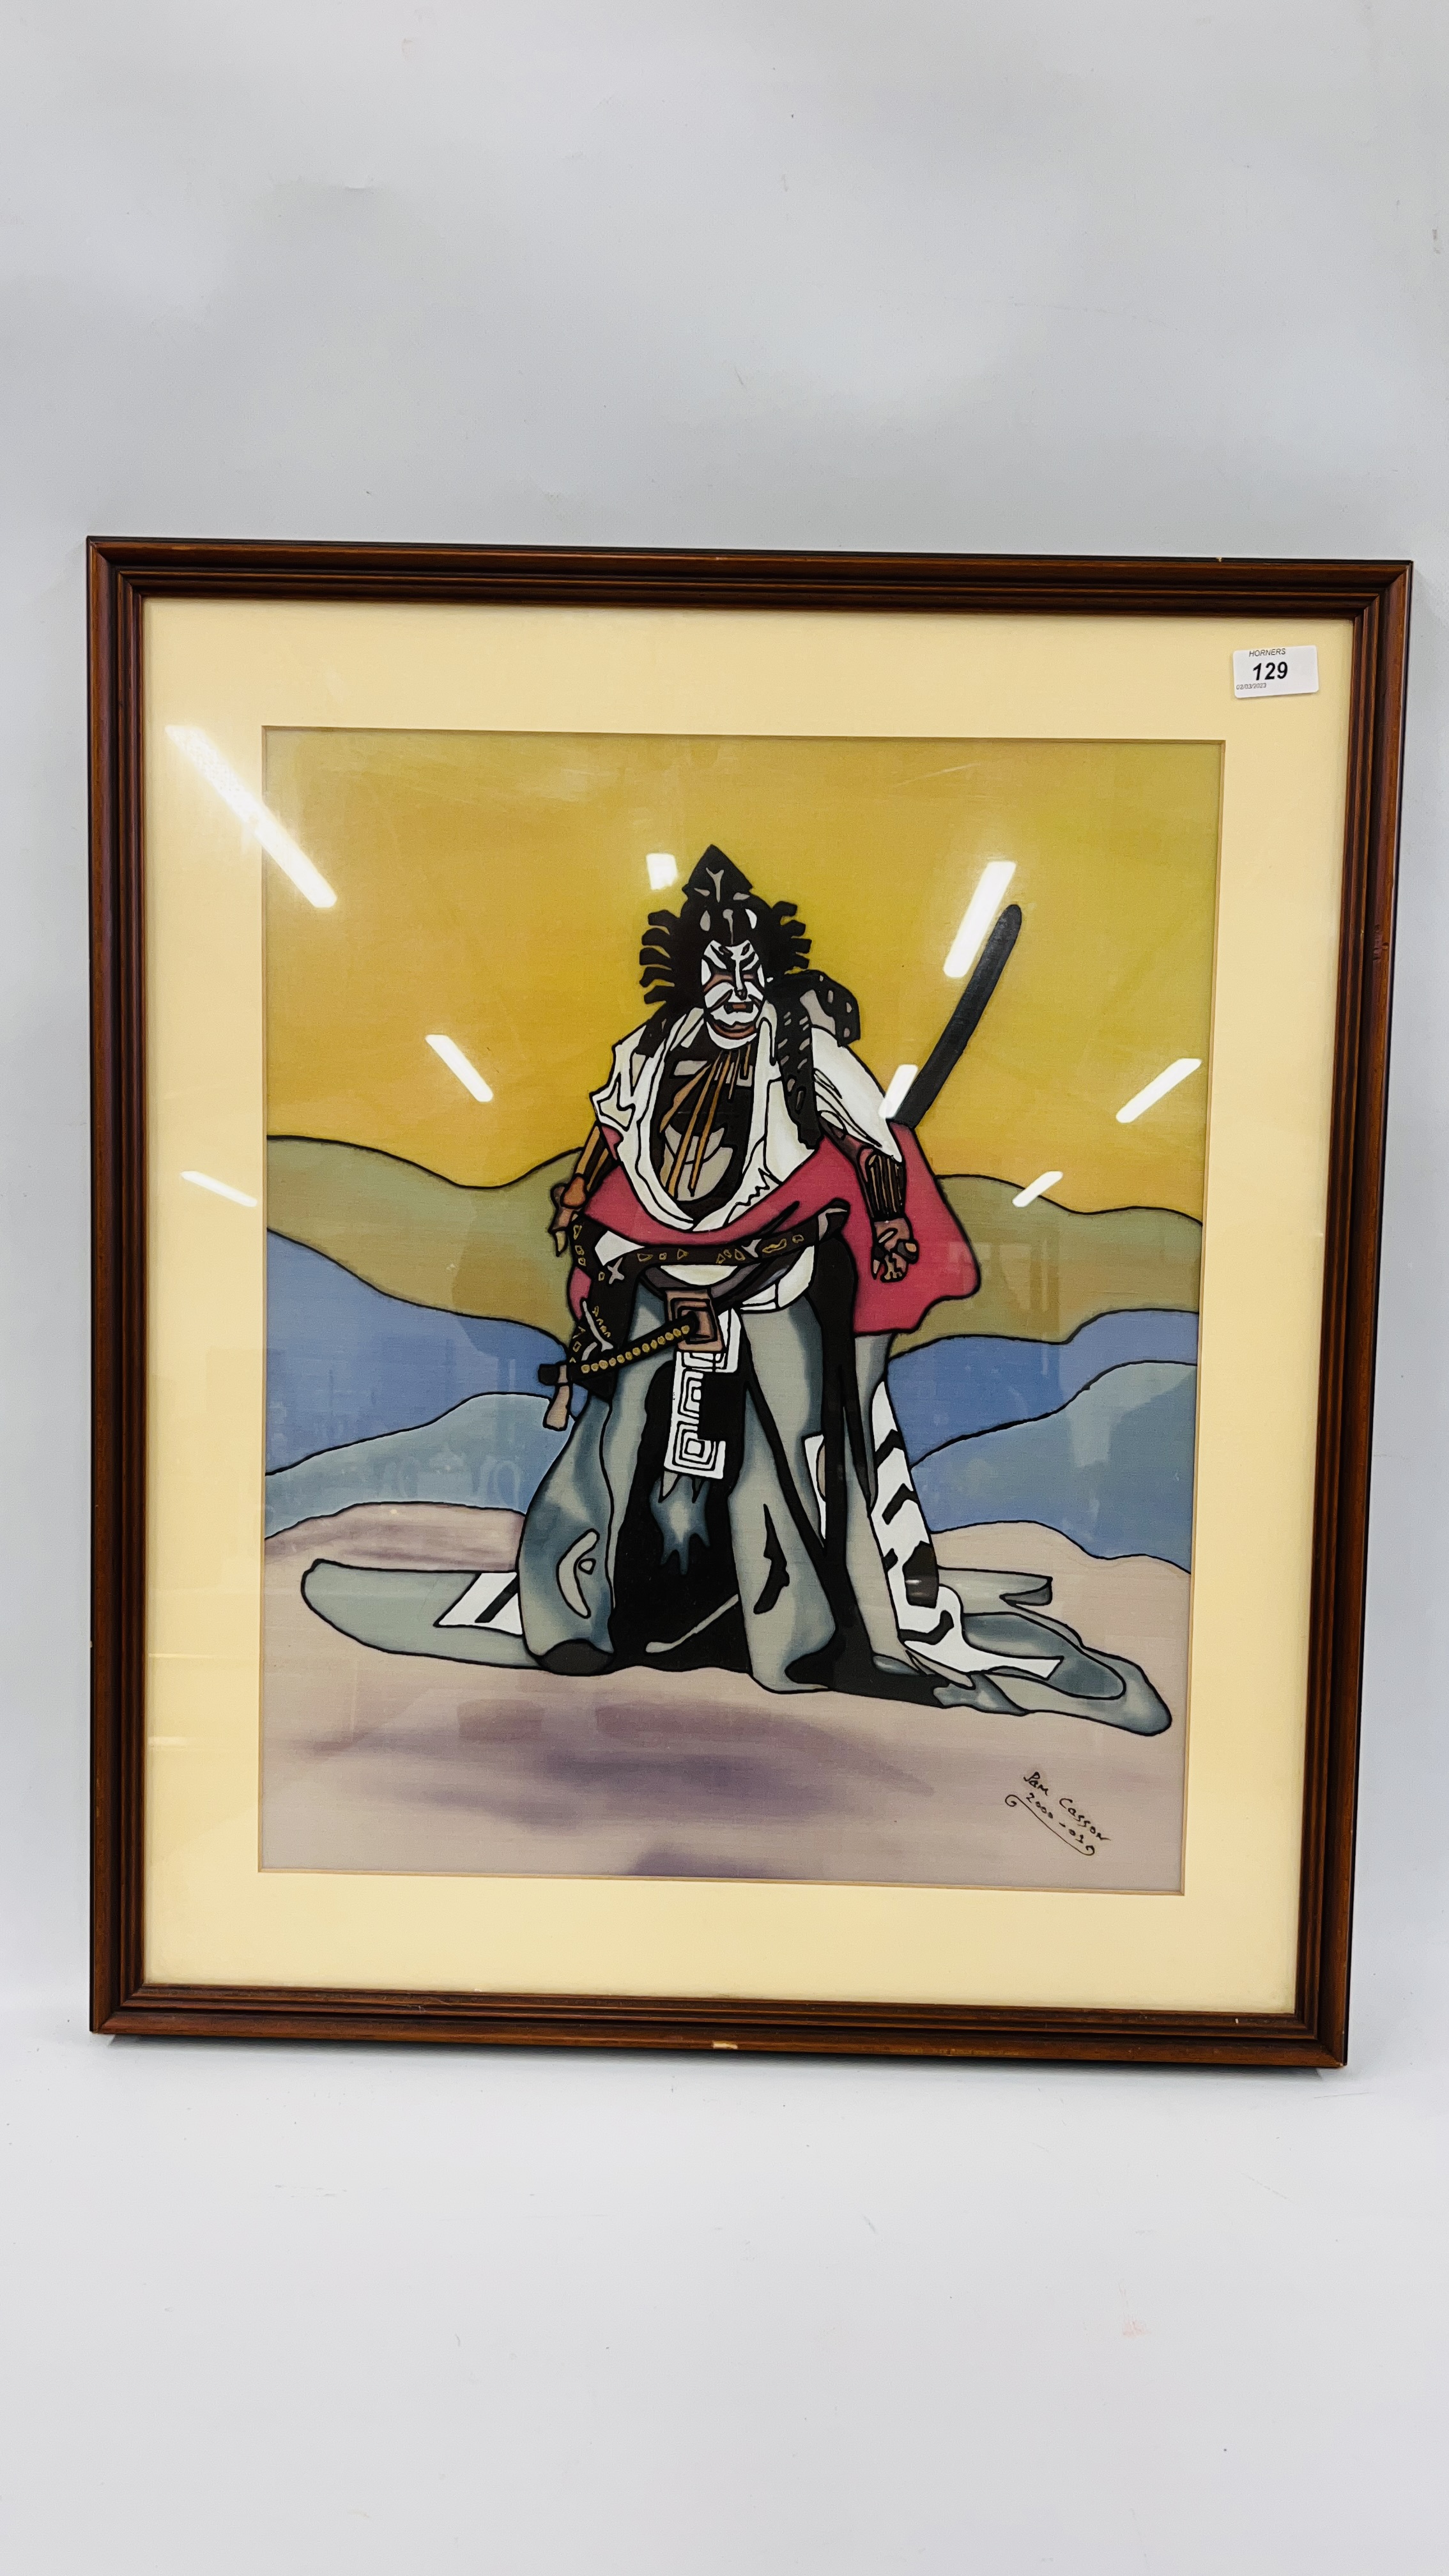 A FRAMED AND MOUNTED SILK OF A WARRIOR BEARING SIGNATURE PAM CASSON 2000.